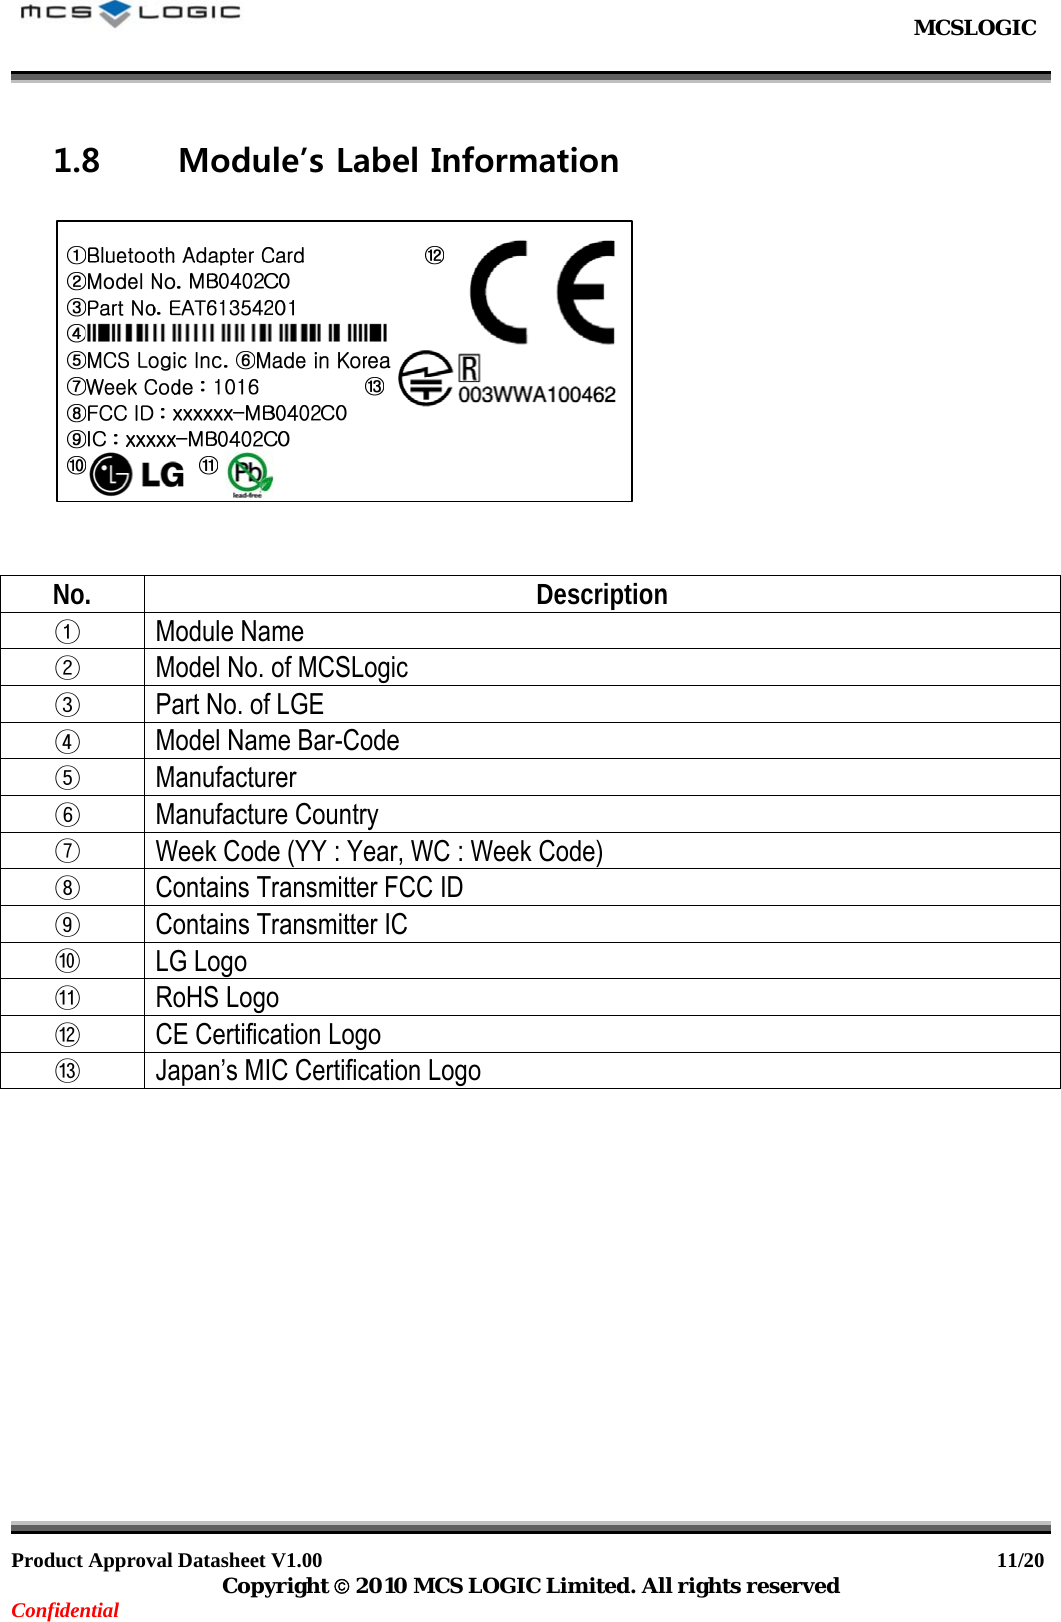                                                           MCSLOGIC                                                                                     Product Approval Datasheet V1.00                                                                  11/20 Copyright © 2010 MCS LOGIC Limited. All rights reserved Confidential 1.8 Module’s Label Information    No. Description ①  Module Name ②  Model No. of MCSLogic ③  Part No. of LGE ④  Model Name Bar-Code ⑤  Manufacturer ⑥  Manufacture Country ⑦  Week Code (YY : Year, WC : Week Code) ⑧  Contains Transmitter FCC ID ⑨  Contains Transmitter IC ⑩  LG Logo ⑪  RoHS Logo ⑫  CE Certification Logo ⑬  Japan’s MIC Certification Logo  